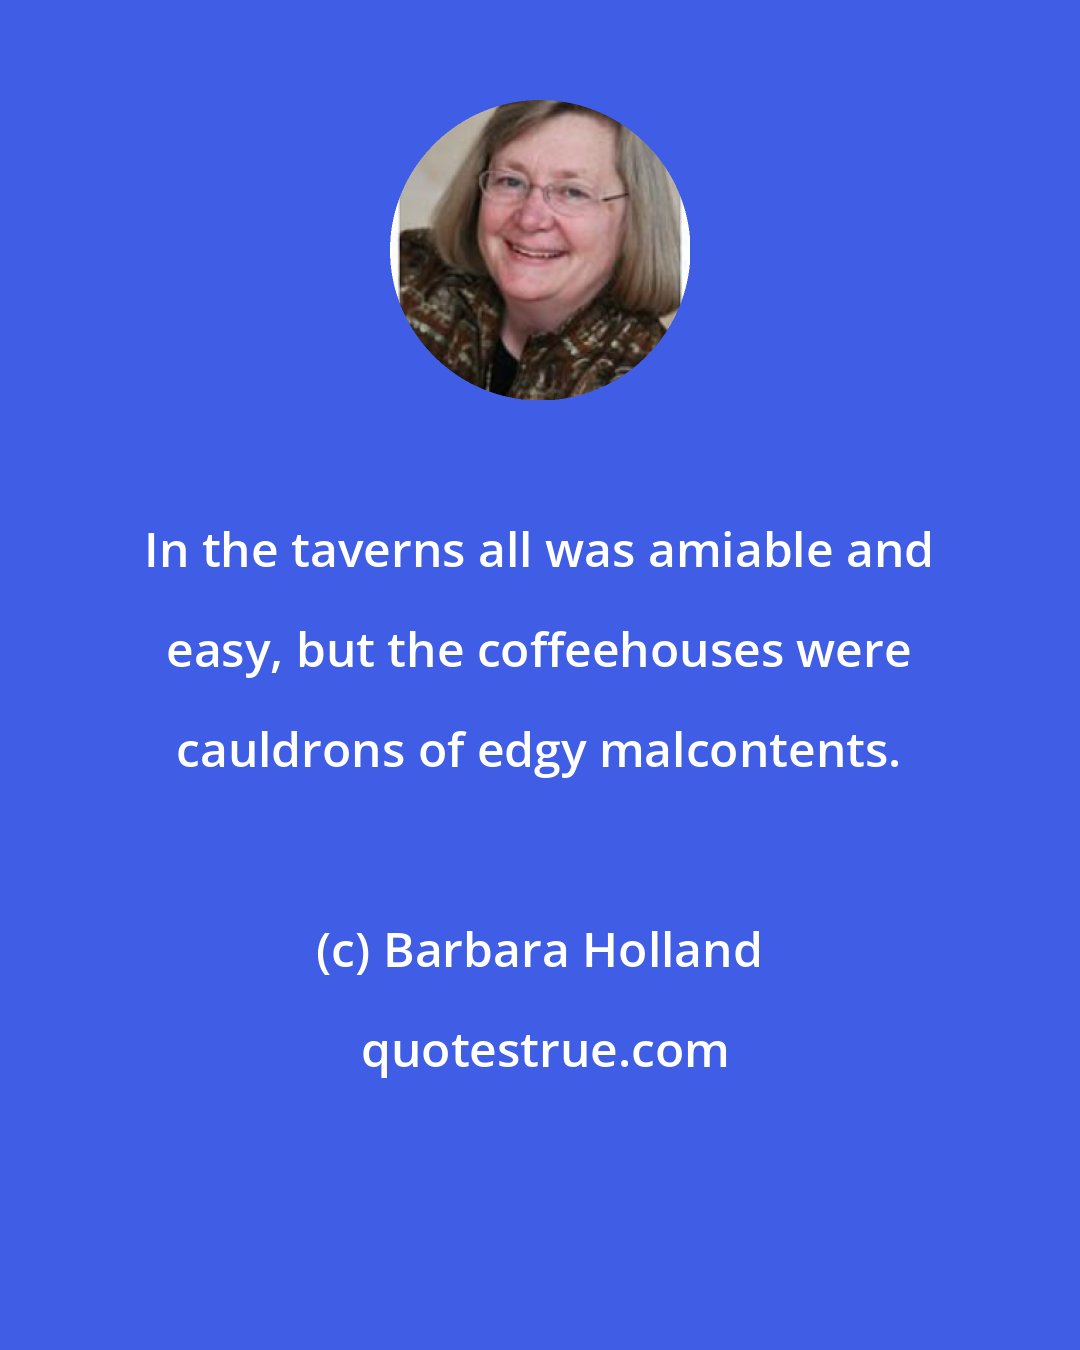 Barbara Holland: In the taverns all was amiable and easy, but the coffeehouses were cauldrons of edgy malcontents.